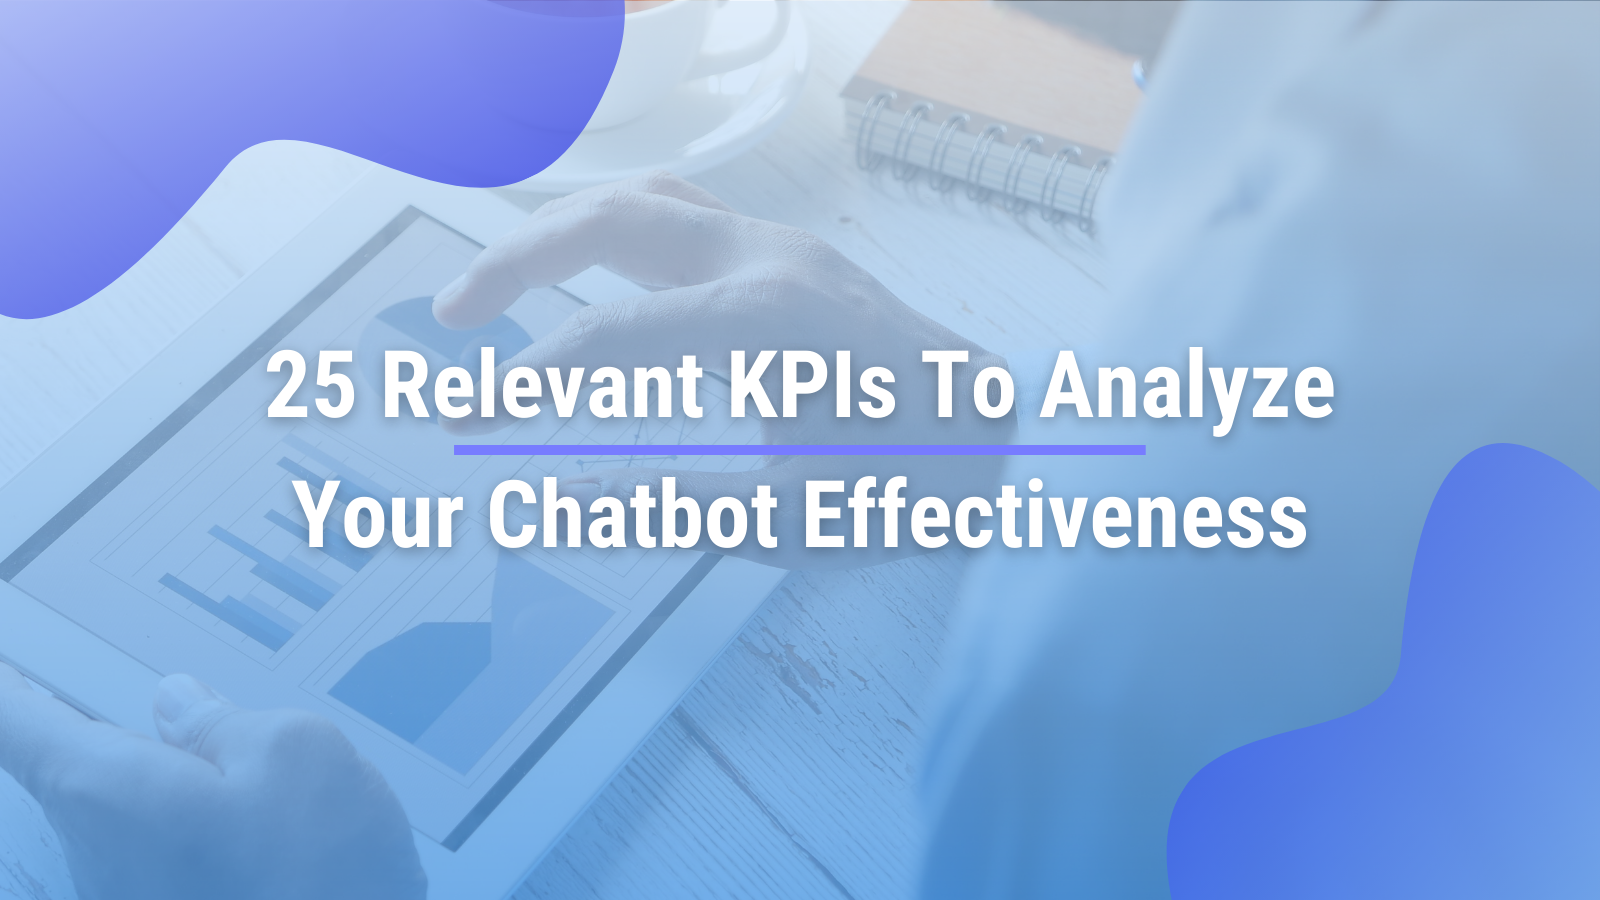 25 Relevant KPIs to Analyze your Chatbot Effectiveness